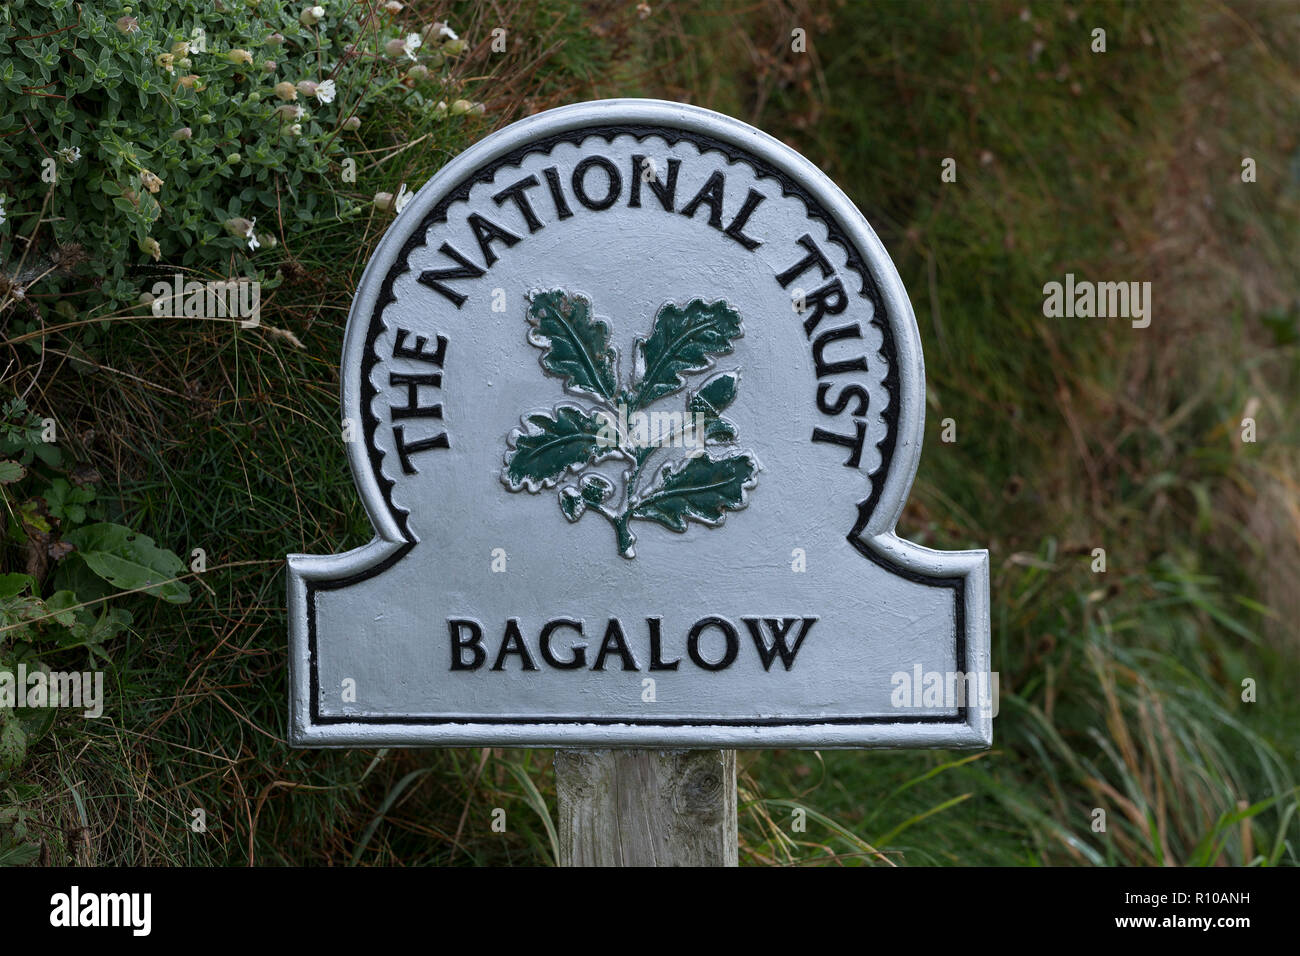 National Trust sign, Bagalow, South West Coast Path near Tintagel, Cornwall, England, Great Britain Stock Photo